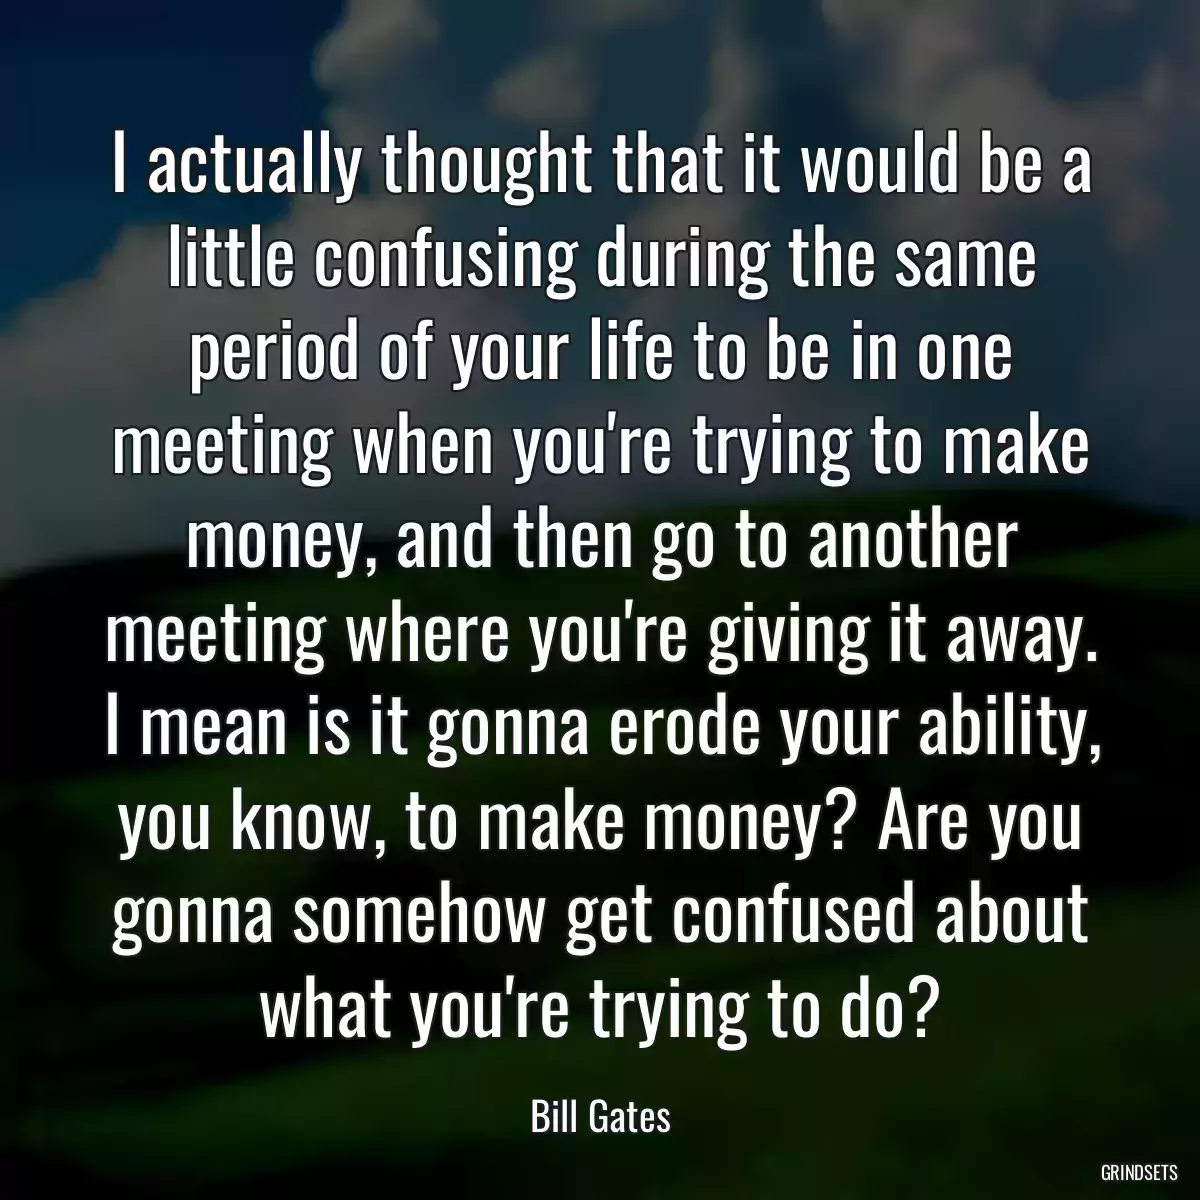 I actually thought that it would be a little confusing during the same period of your life to be in one meeting when you\'re trying to make money, and then go to another meeting where you\'re giving it away. I mean is it gonna erode your ability, you know, to make money? Are you gonna somehow get confused about what you\'re trying to do?